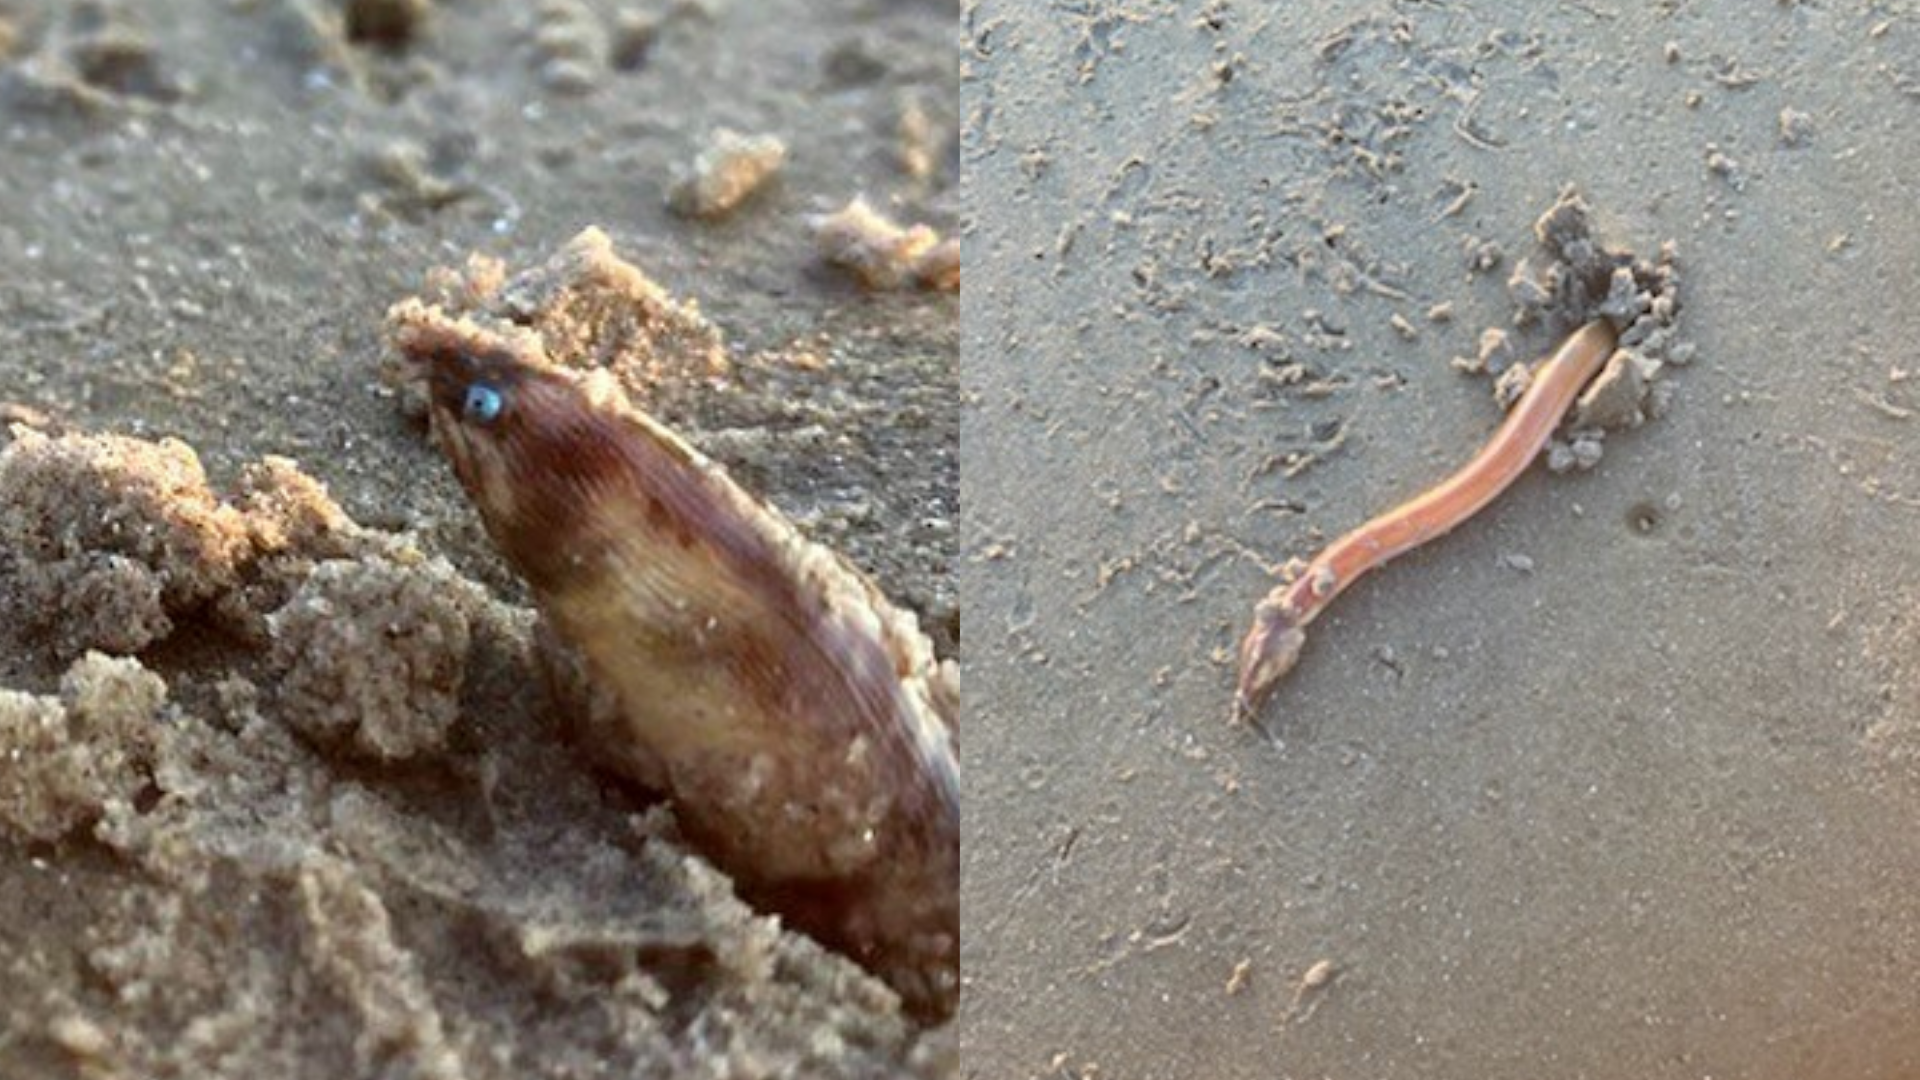 Aliens watching us': Meet the shrimp eel, the wriggly, worm-like creature  seen burrowing on Texas beaches